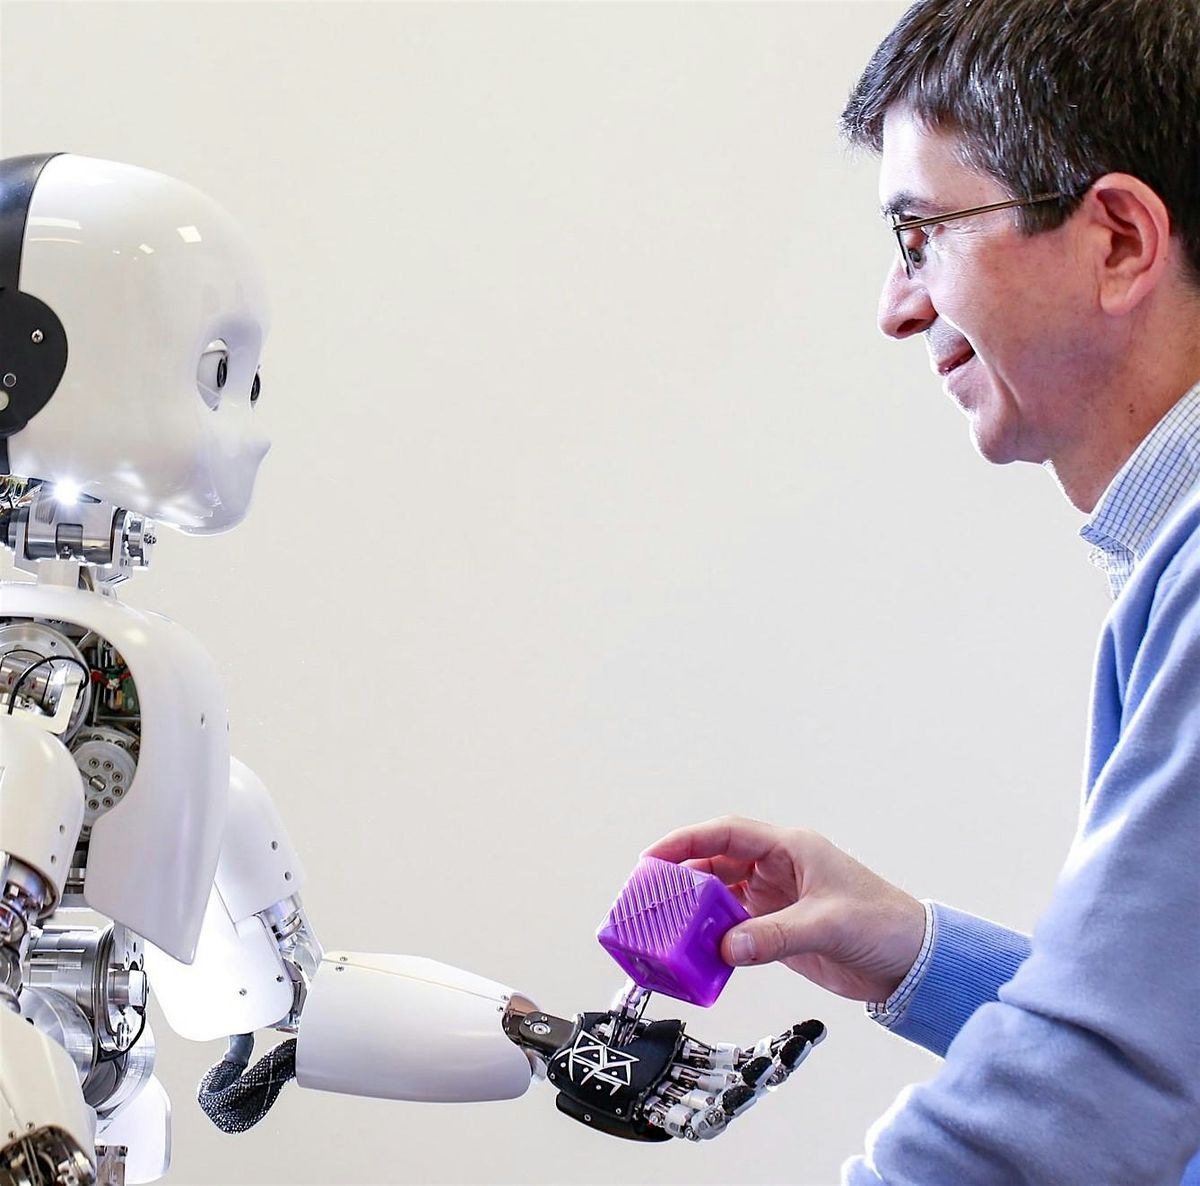 Cognitive Robotics: From Babies to Robots and AI